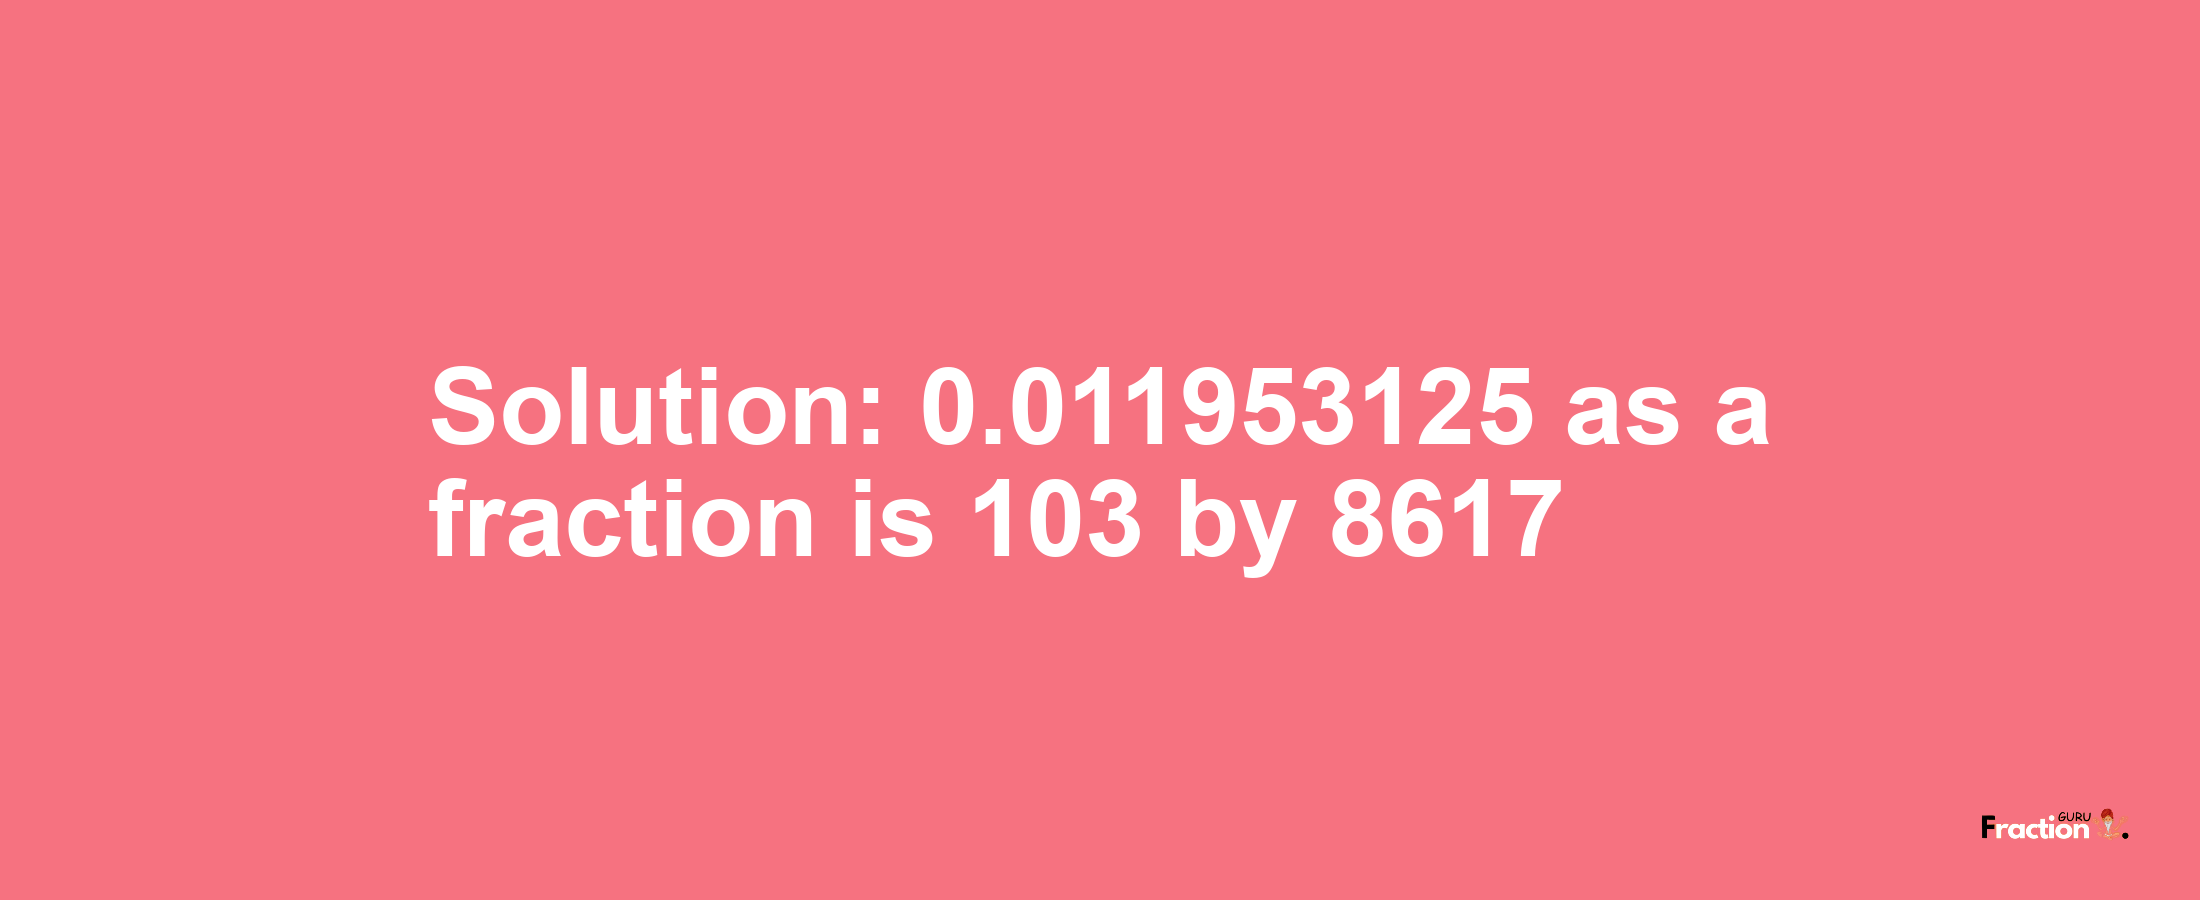 Solution:0.011953125 as a fraction is 103/8617